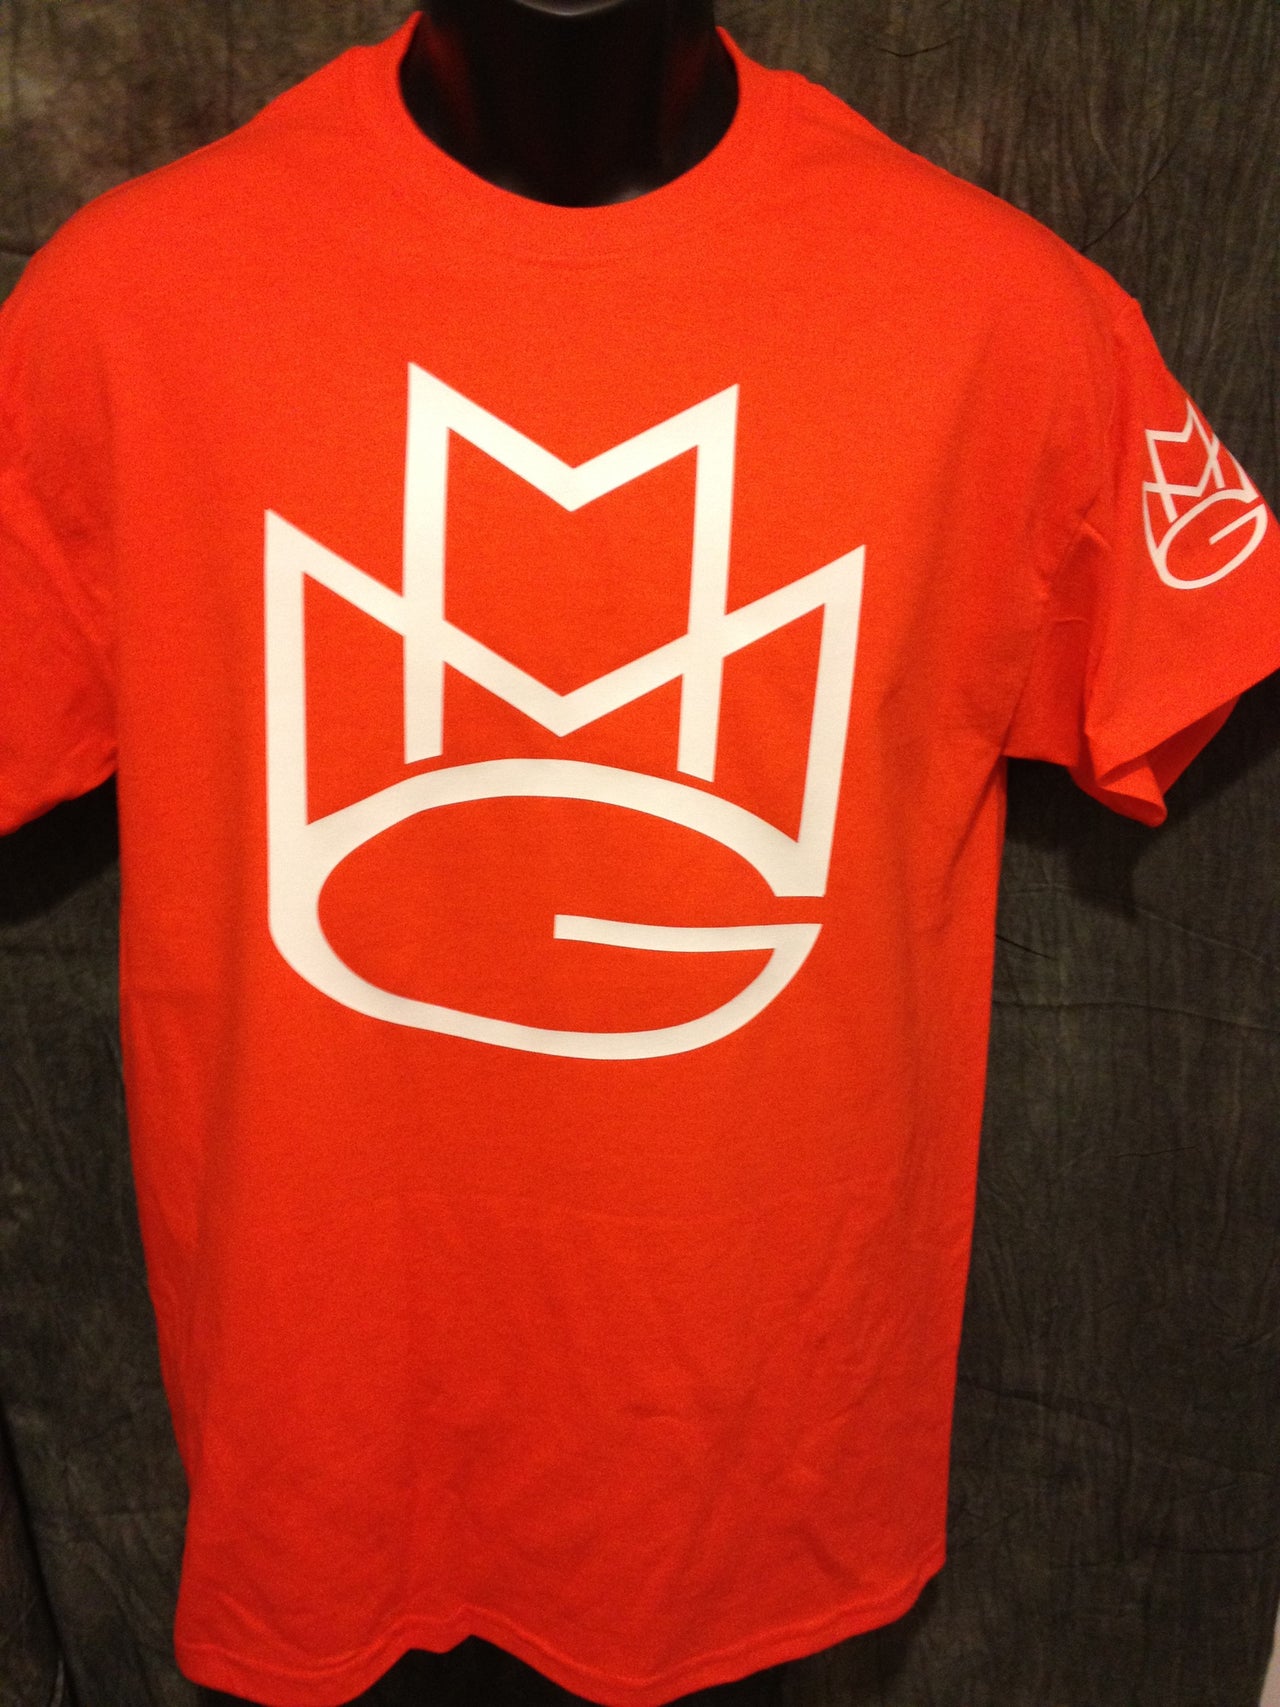 Maybach Music Group Limited Edition Tshirt: Orange with White and Black Print - TshirtNow.net - 1